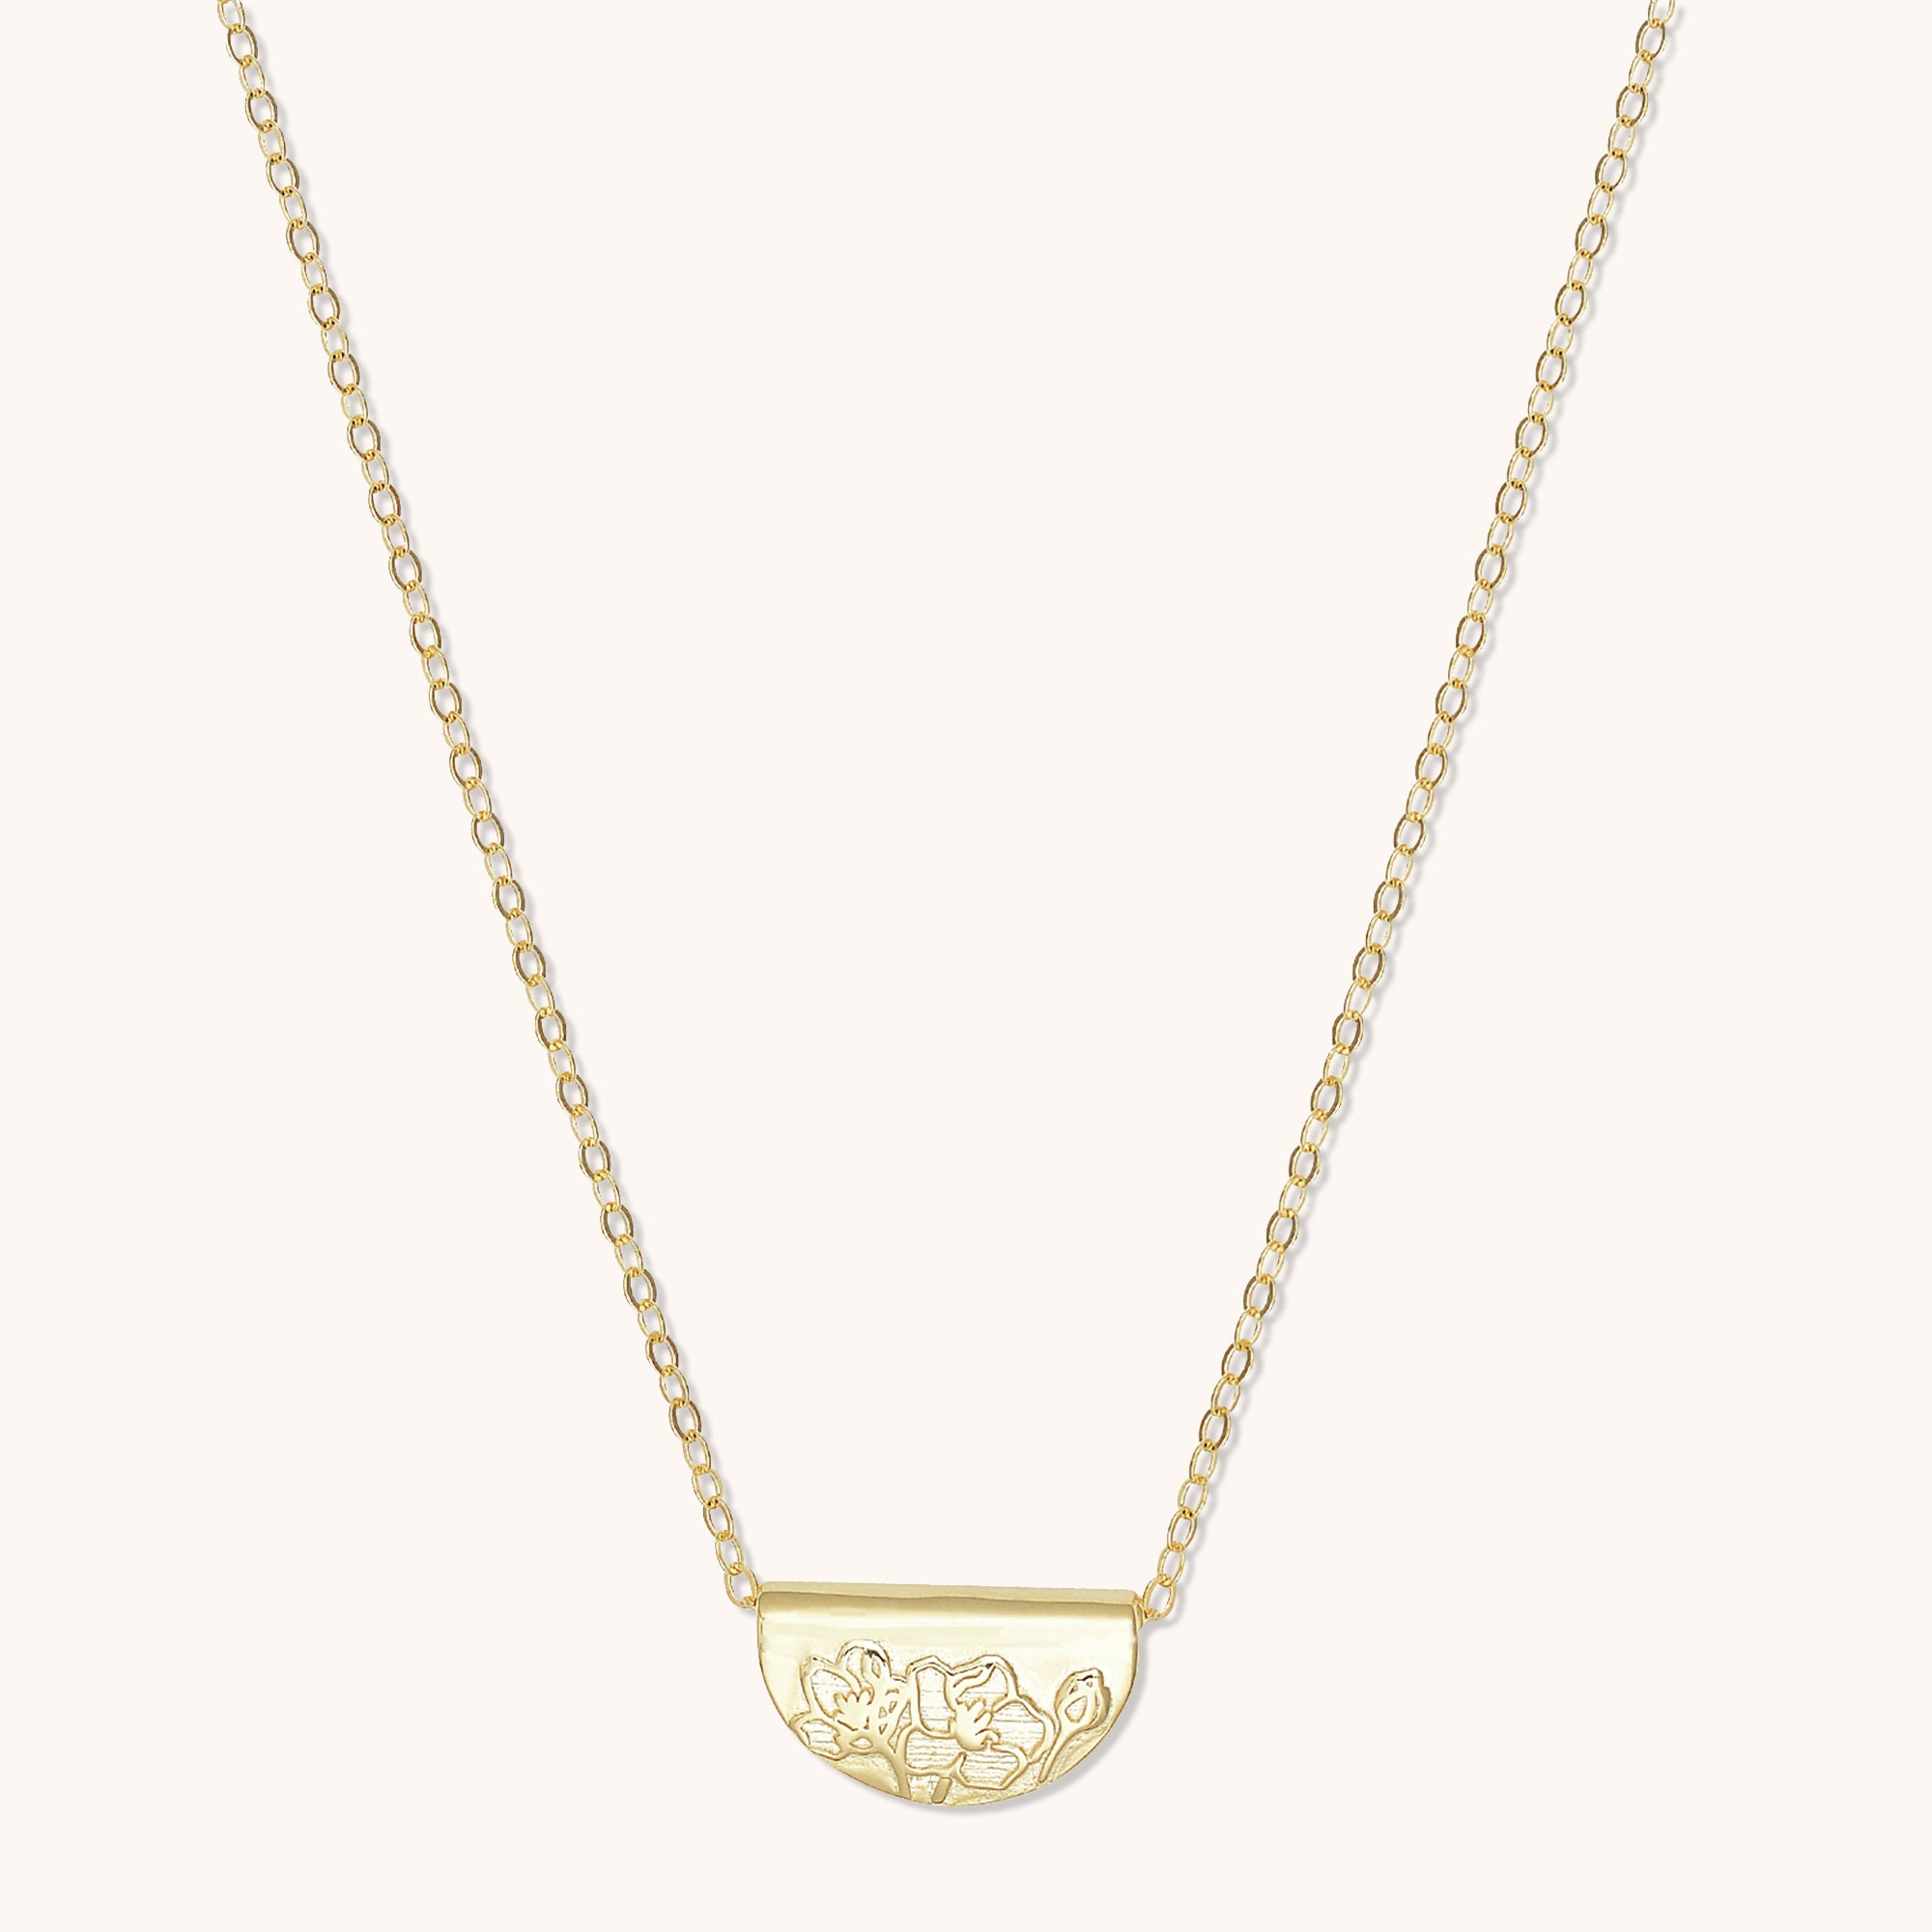 Birth Flower Necklace May (Hawthorn) Gold